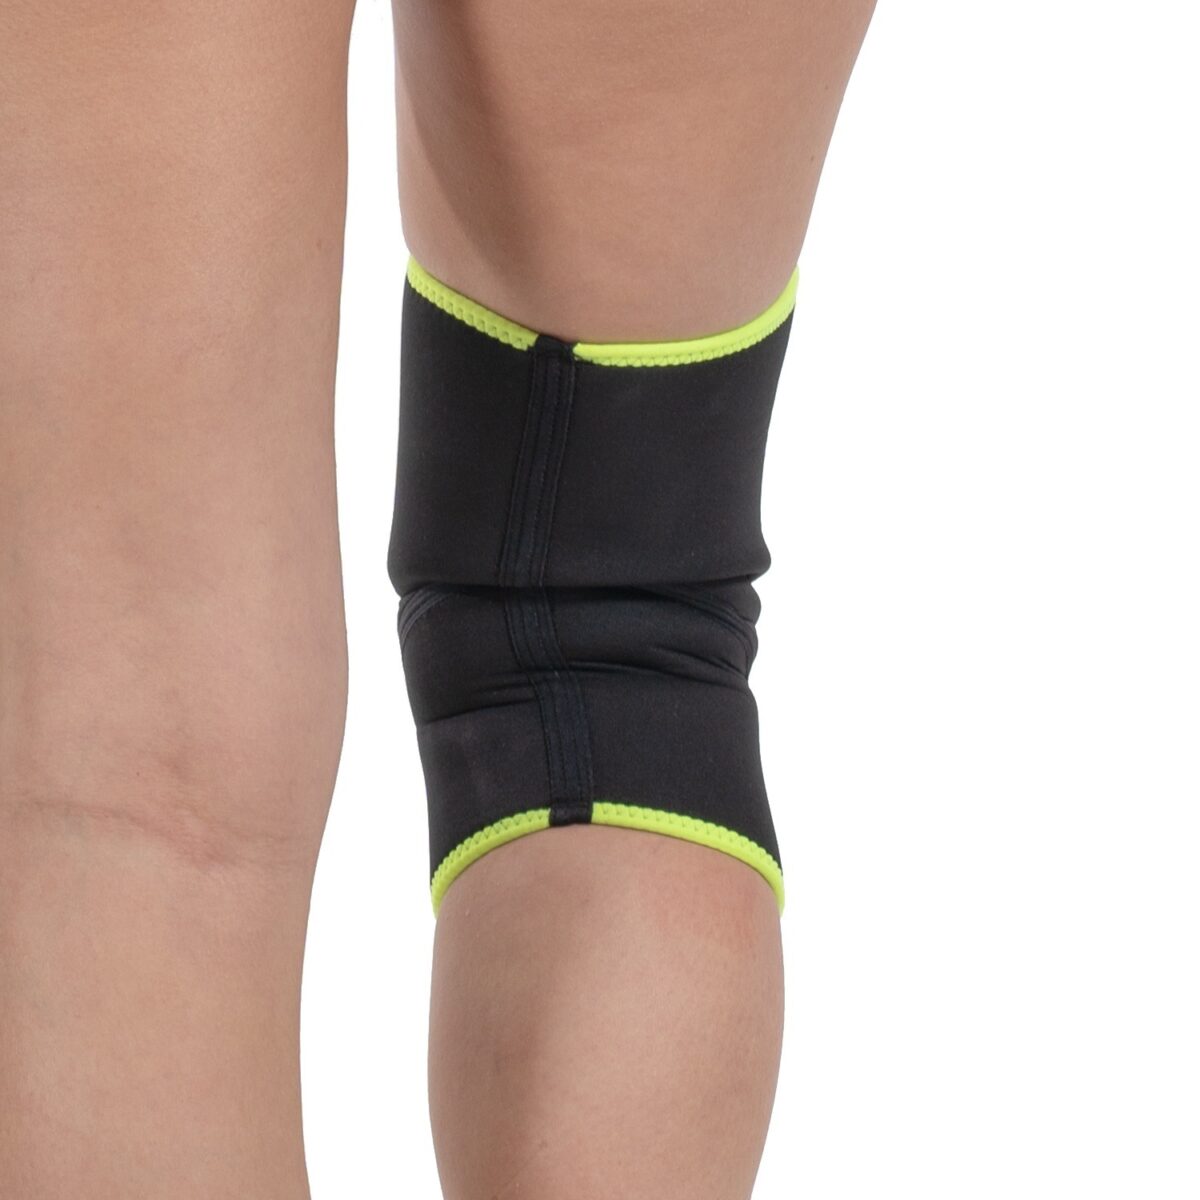 wingmed orthopedic equipments W512 sportive knee support with pad 36